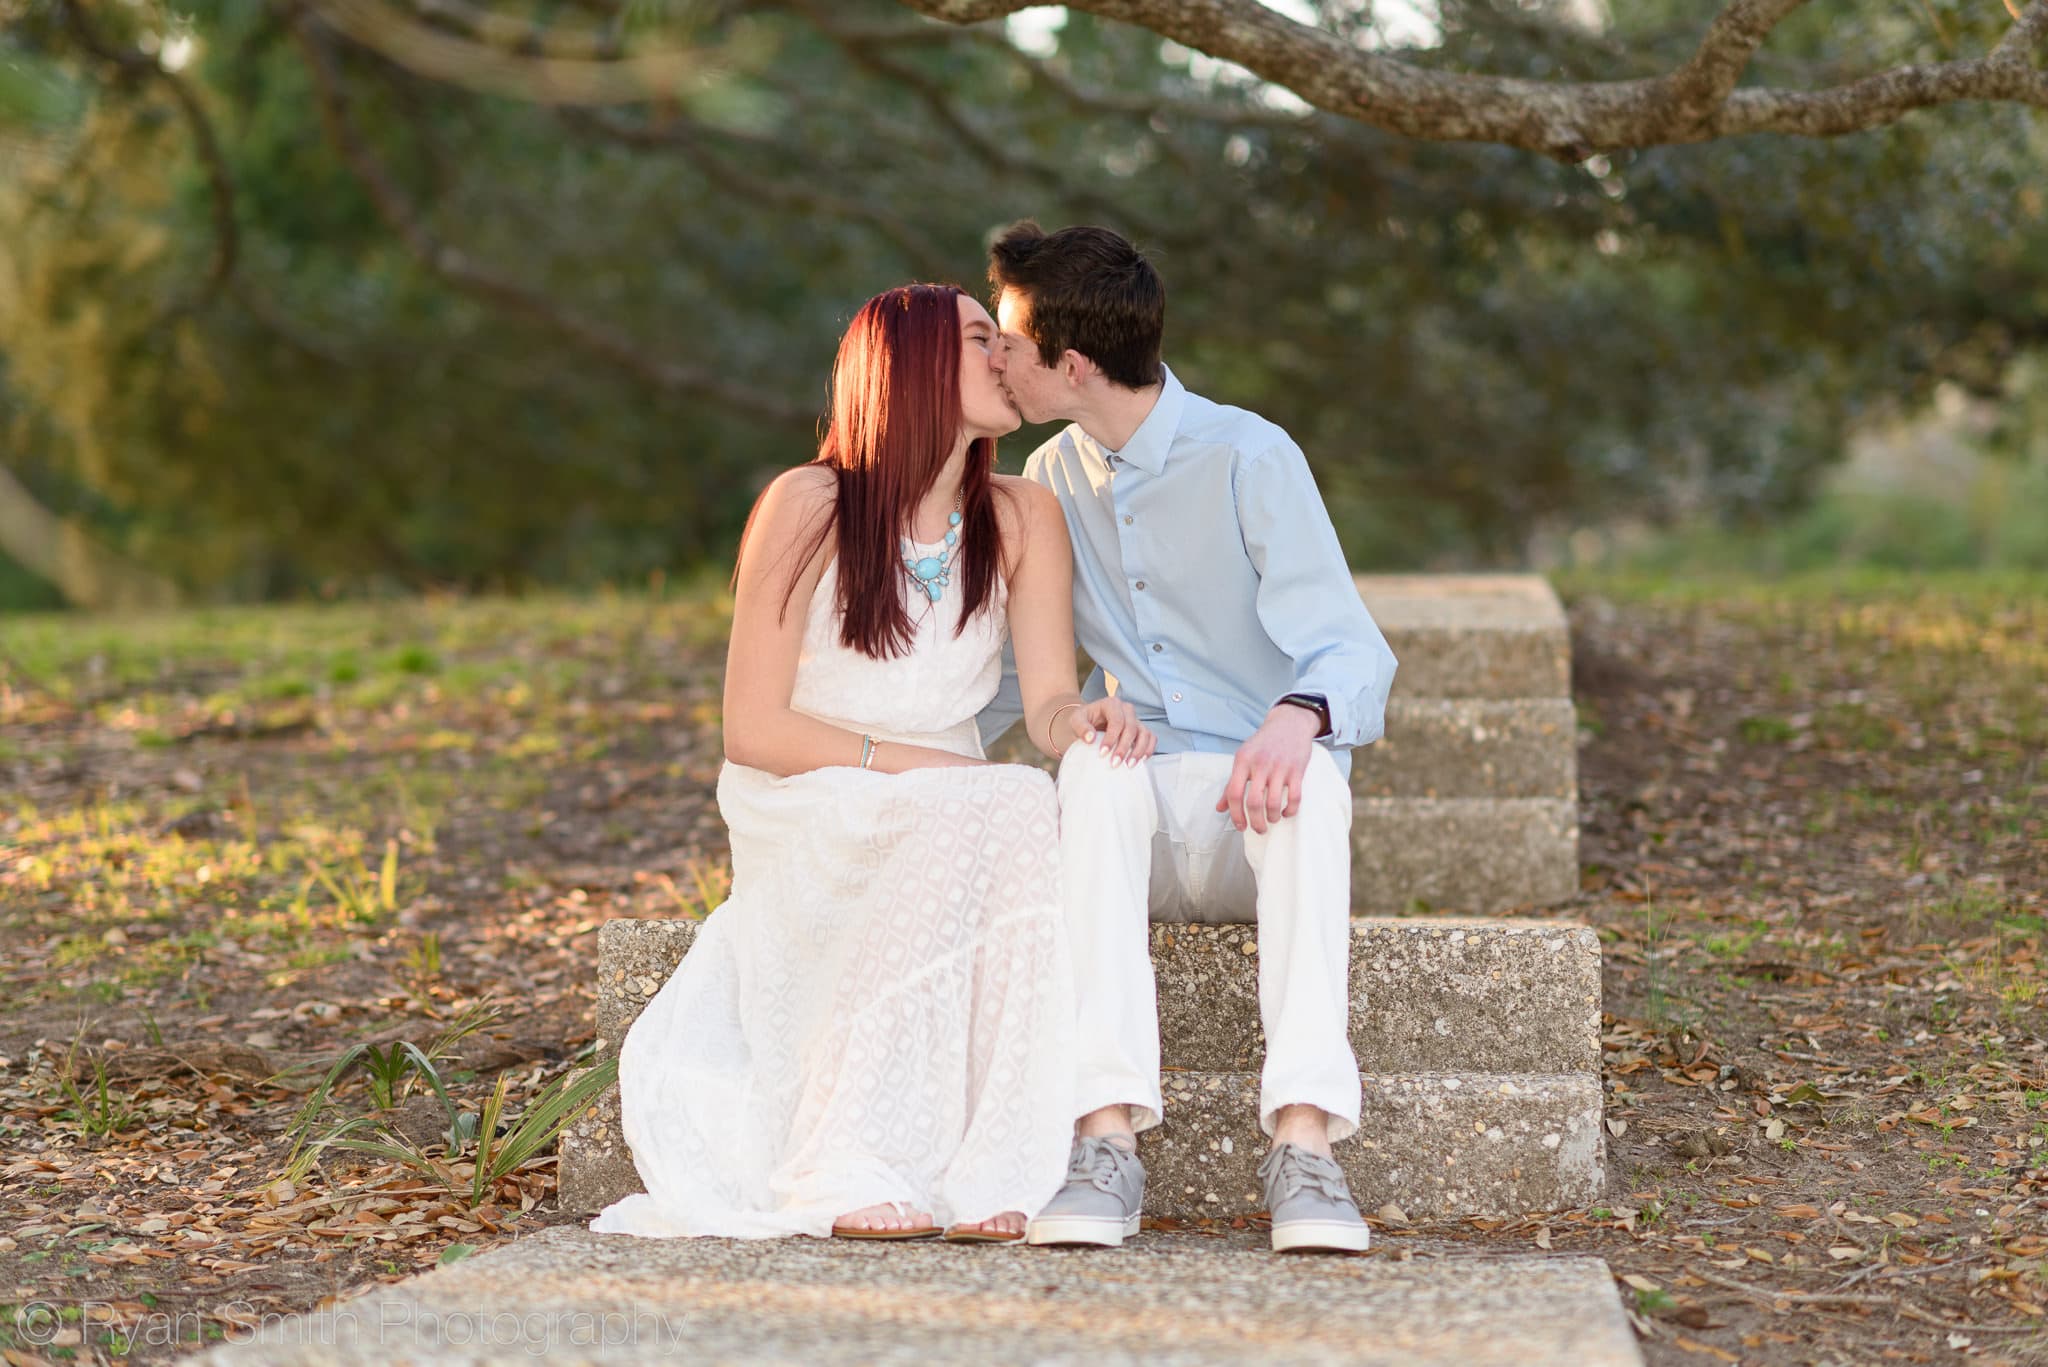 Kiss on the old steps - Myrtle Beach State Park